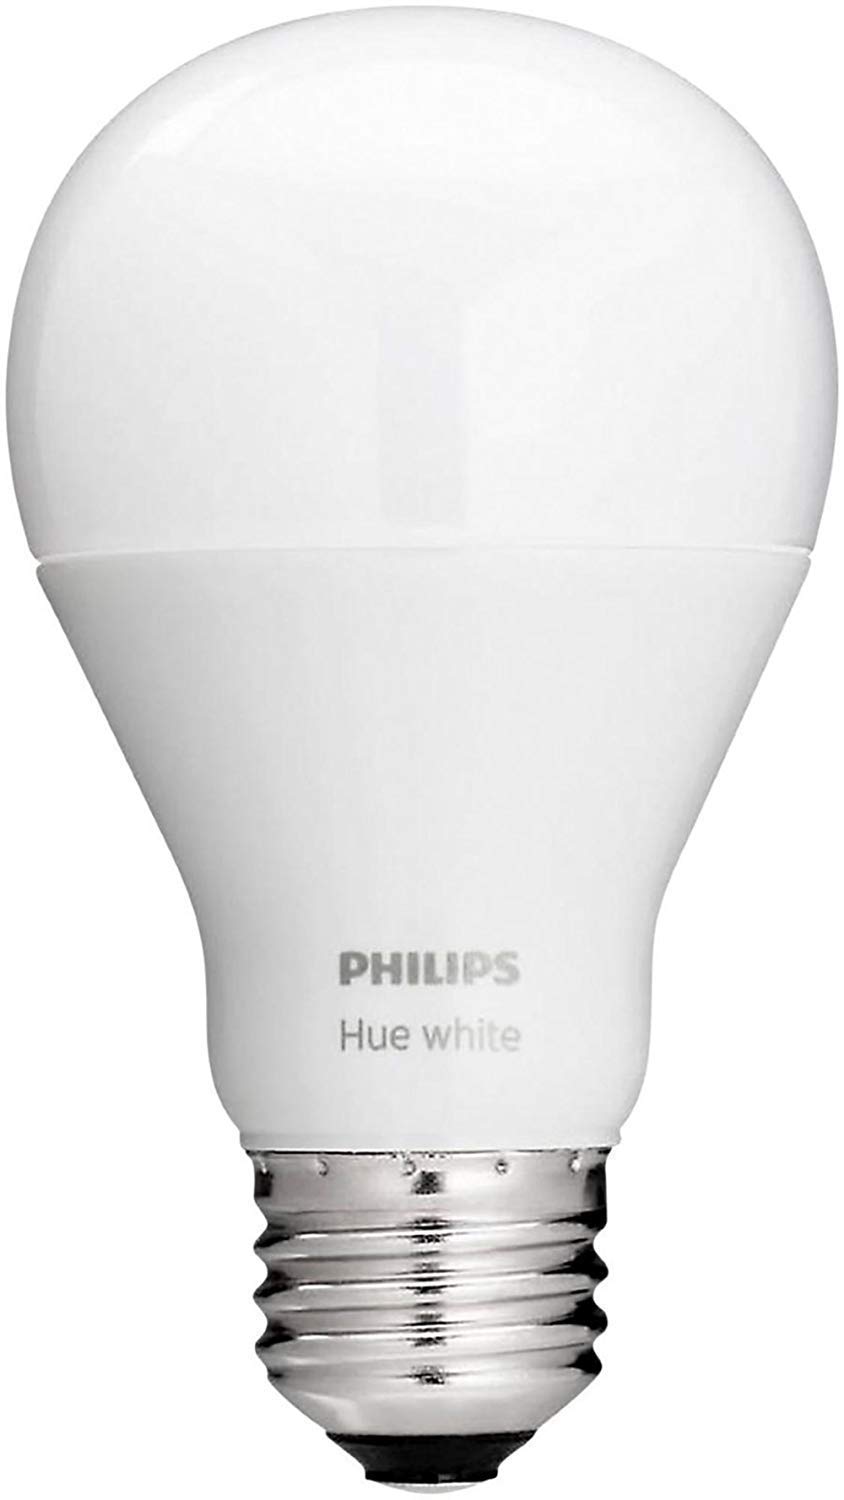 Philips Hue white and color